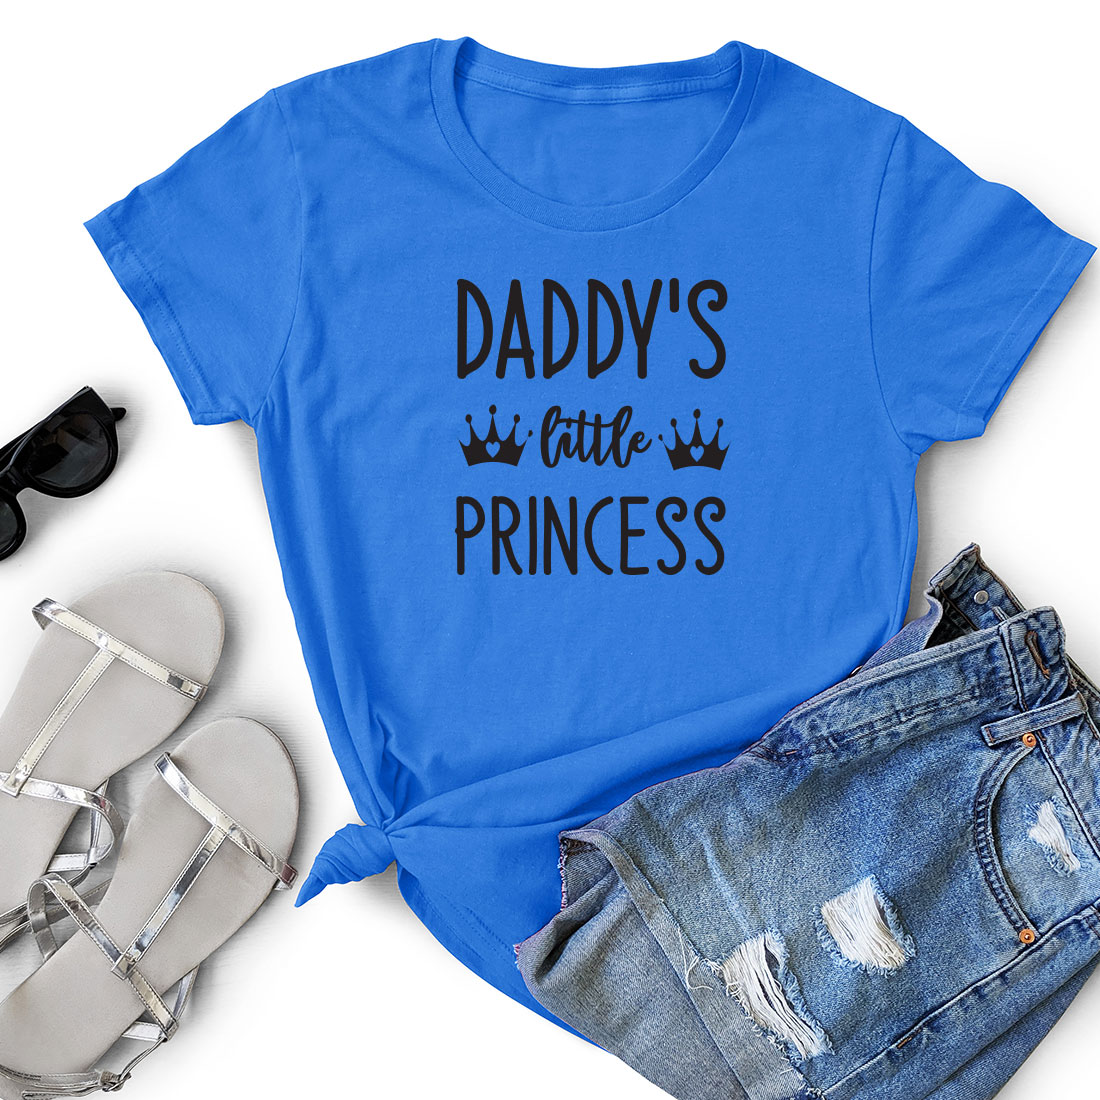 T - shirt that says daddy's little princess next to a pair of.